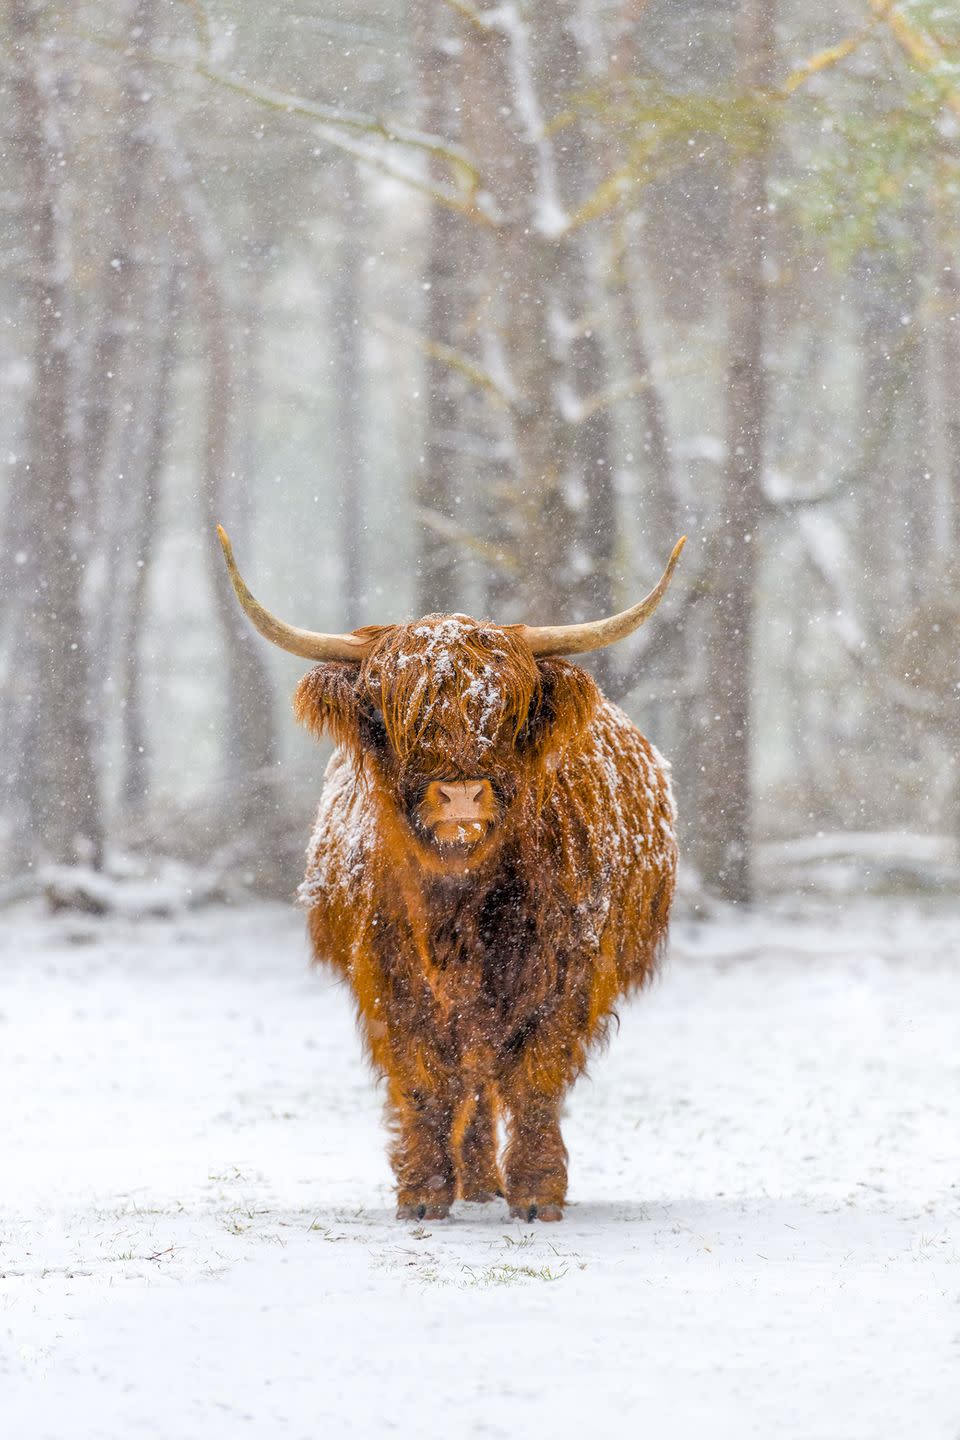 <p>An iconic image of Scotland, this snow-dusted Highland cow looks warm and protected. </p>